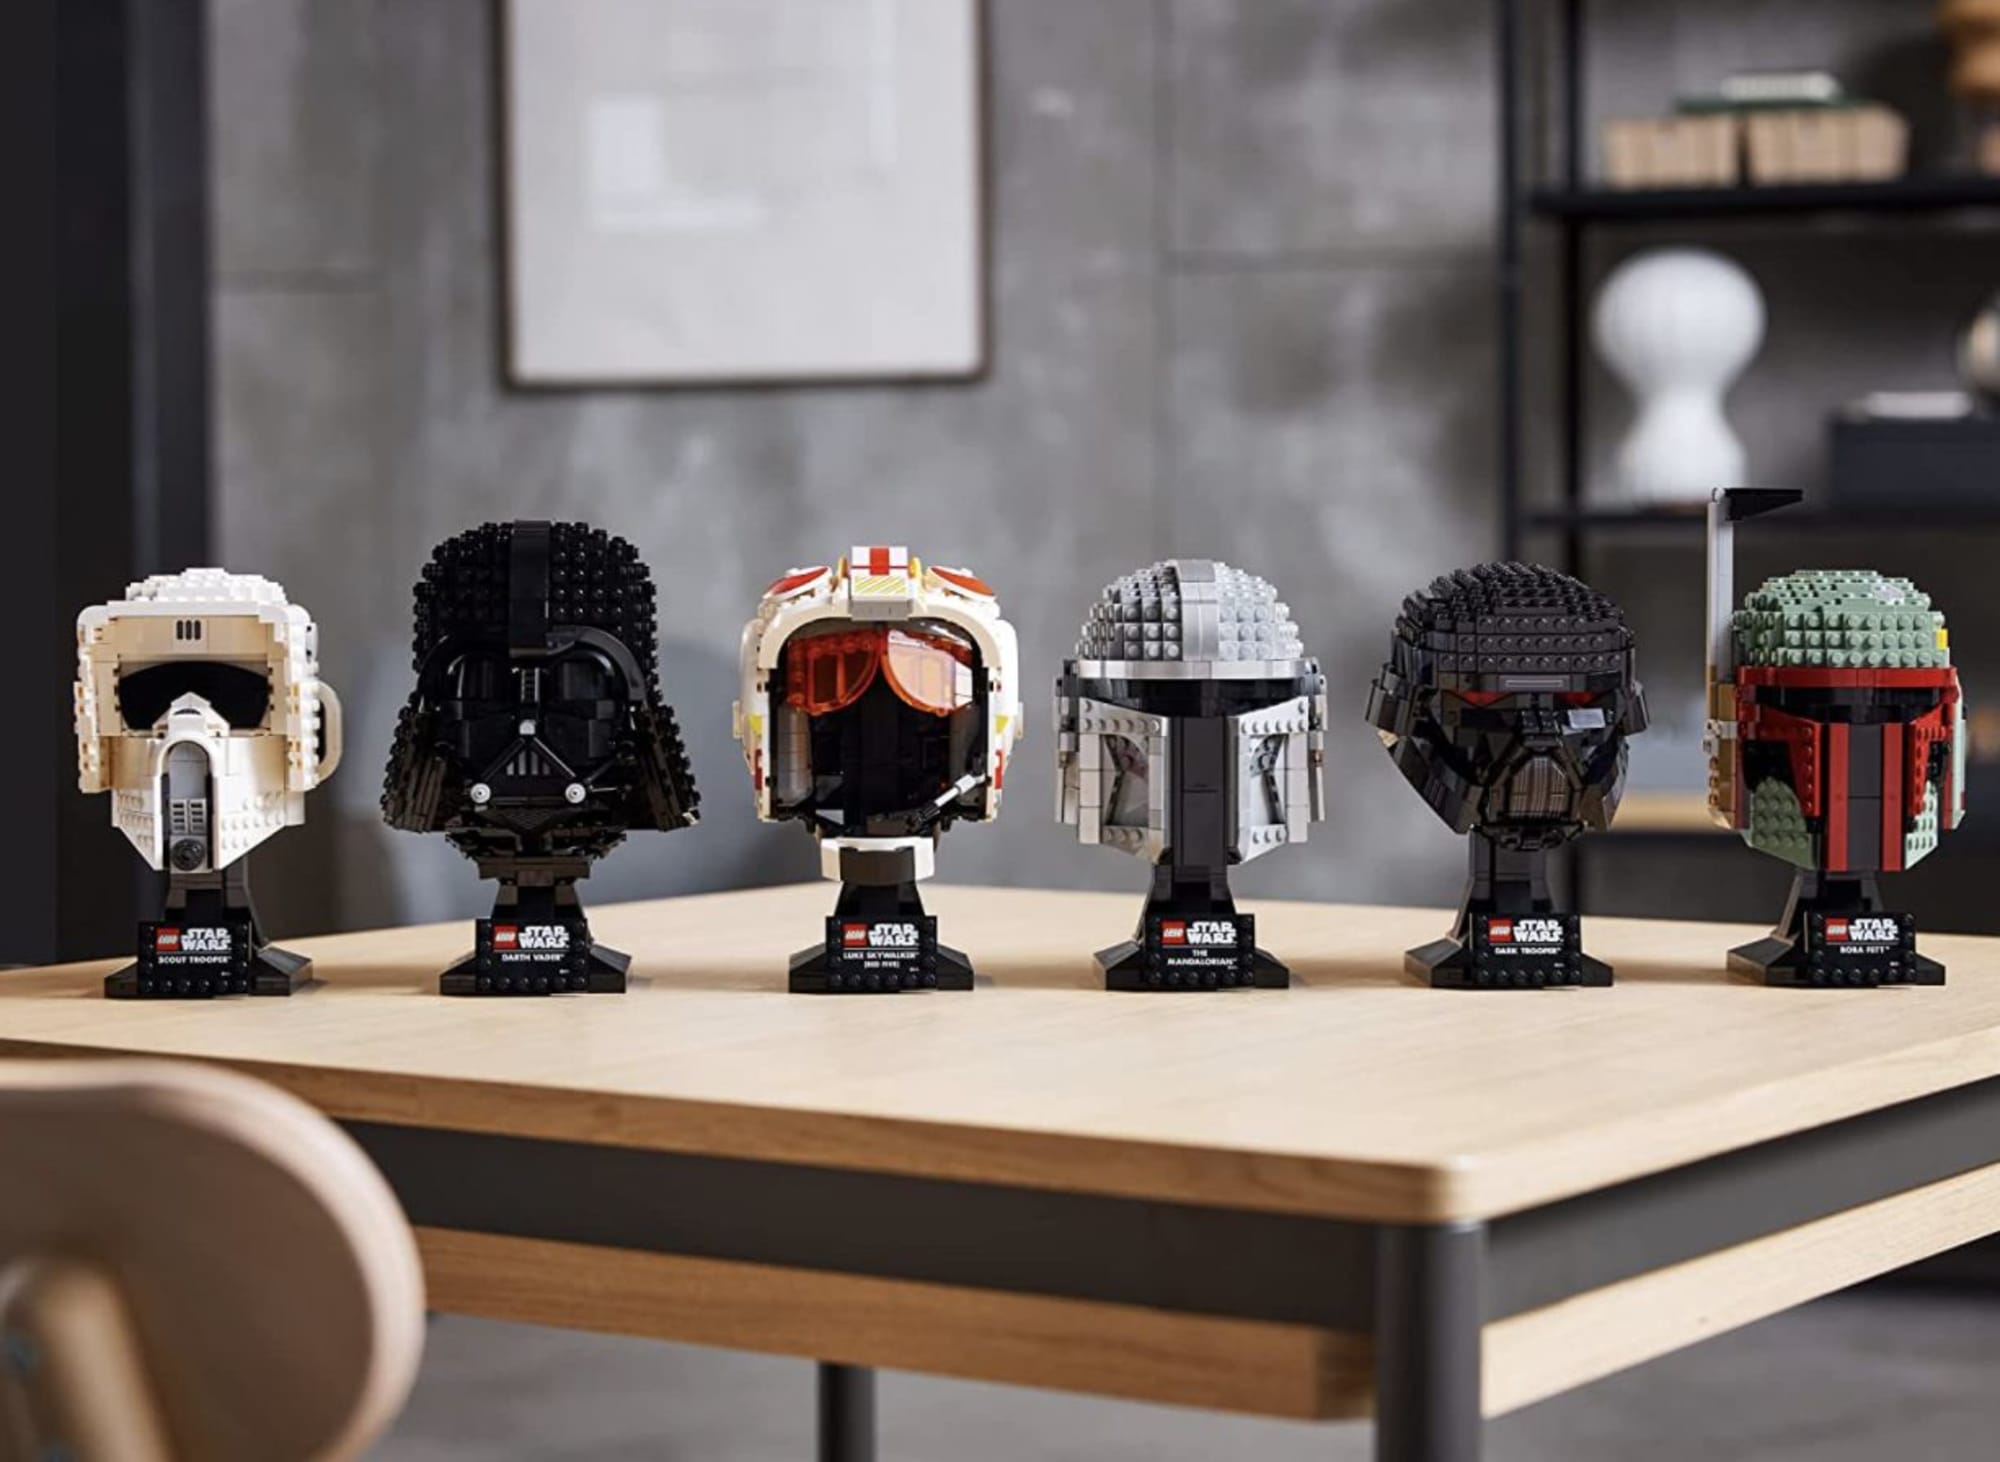 LEGO releases new Star Wars helmets that you can now preorder